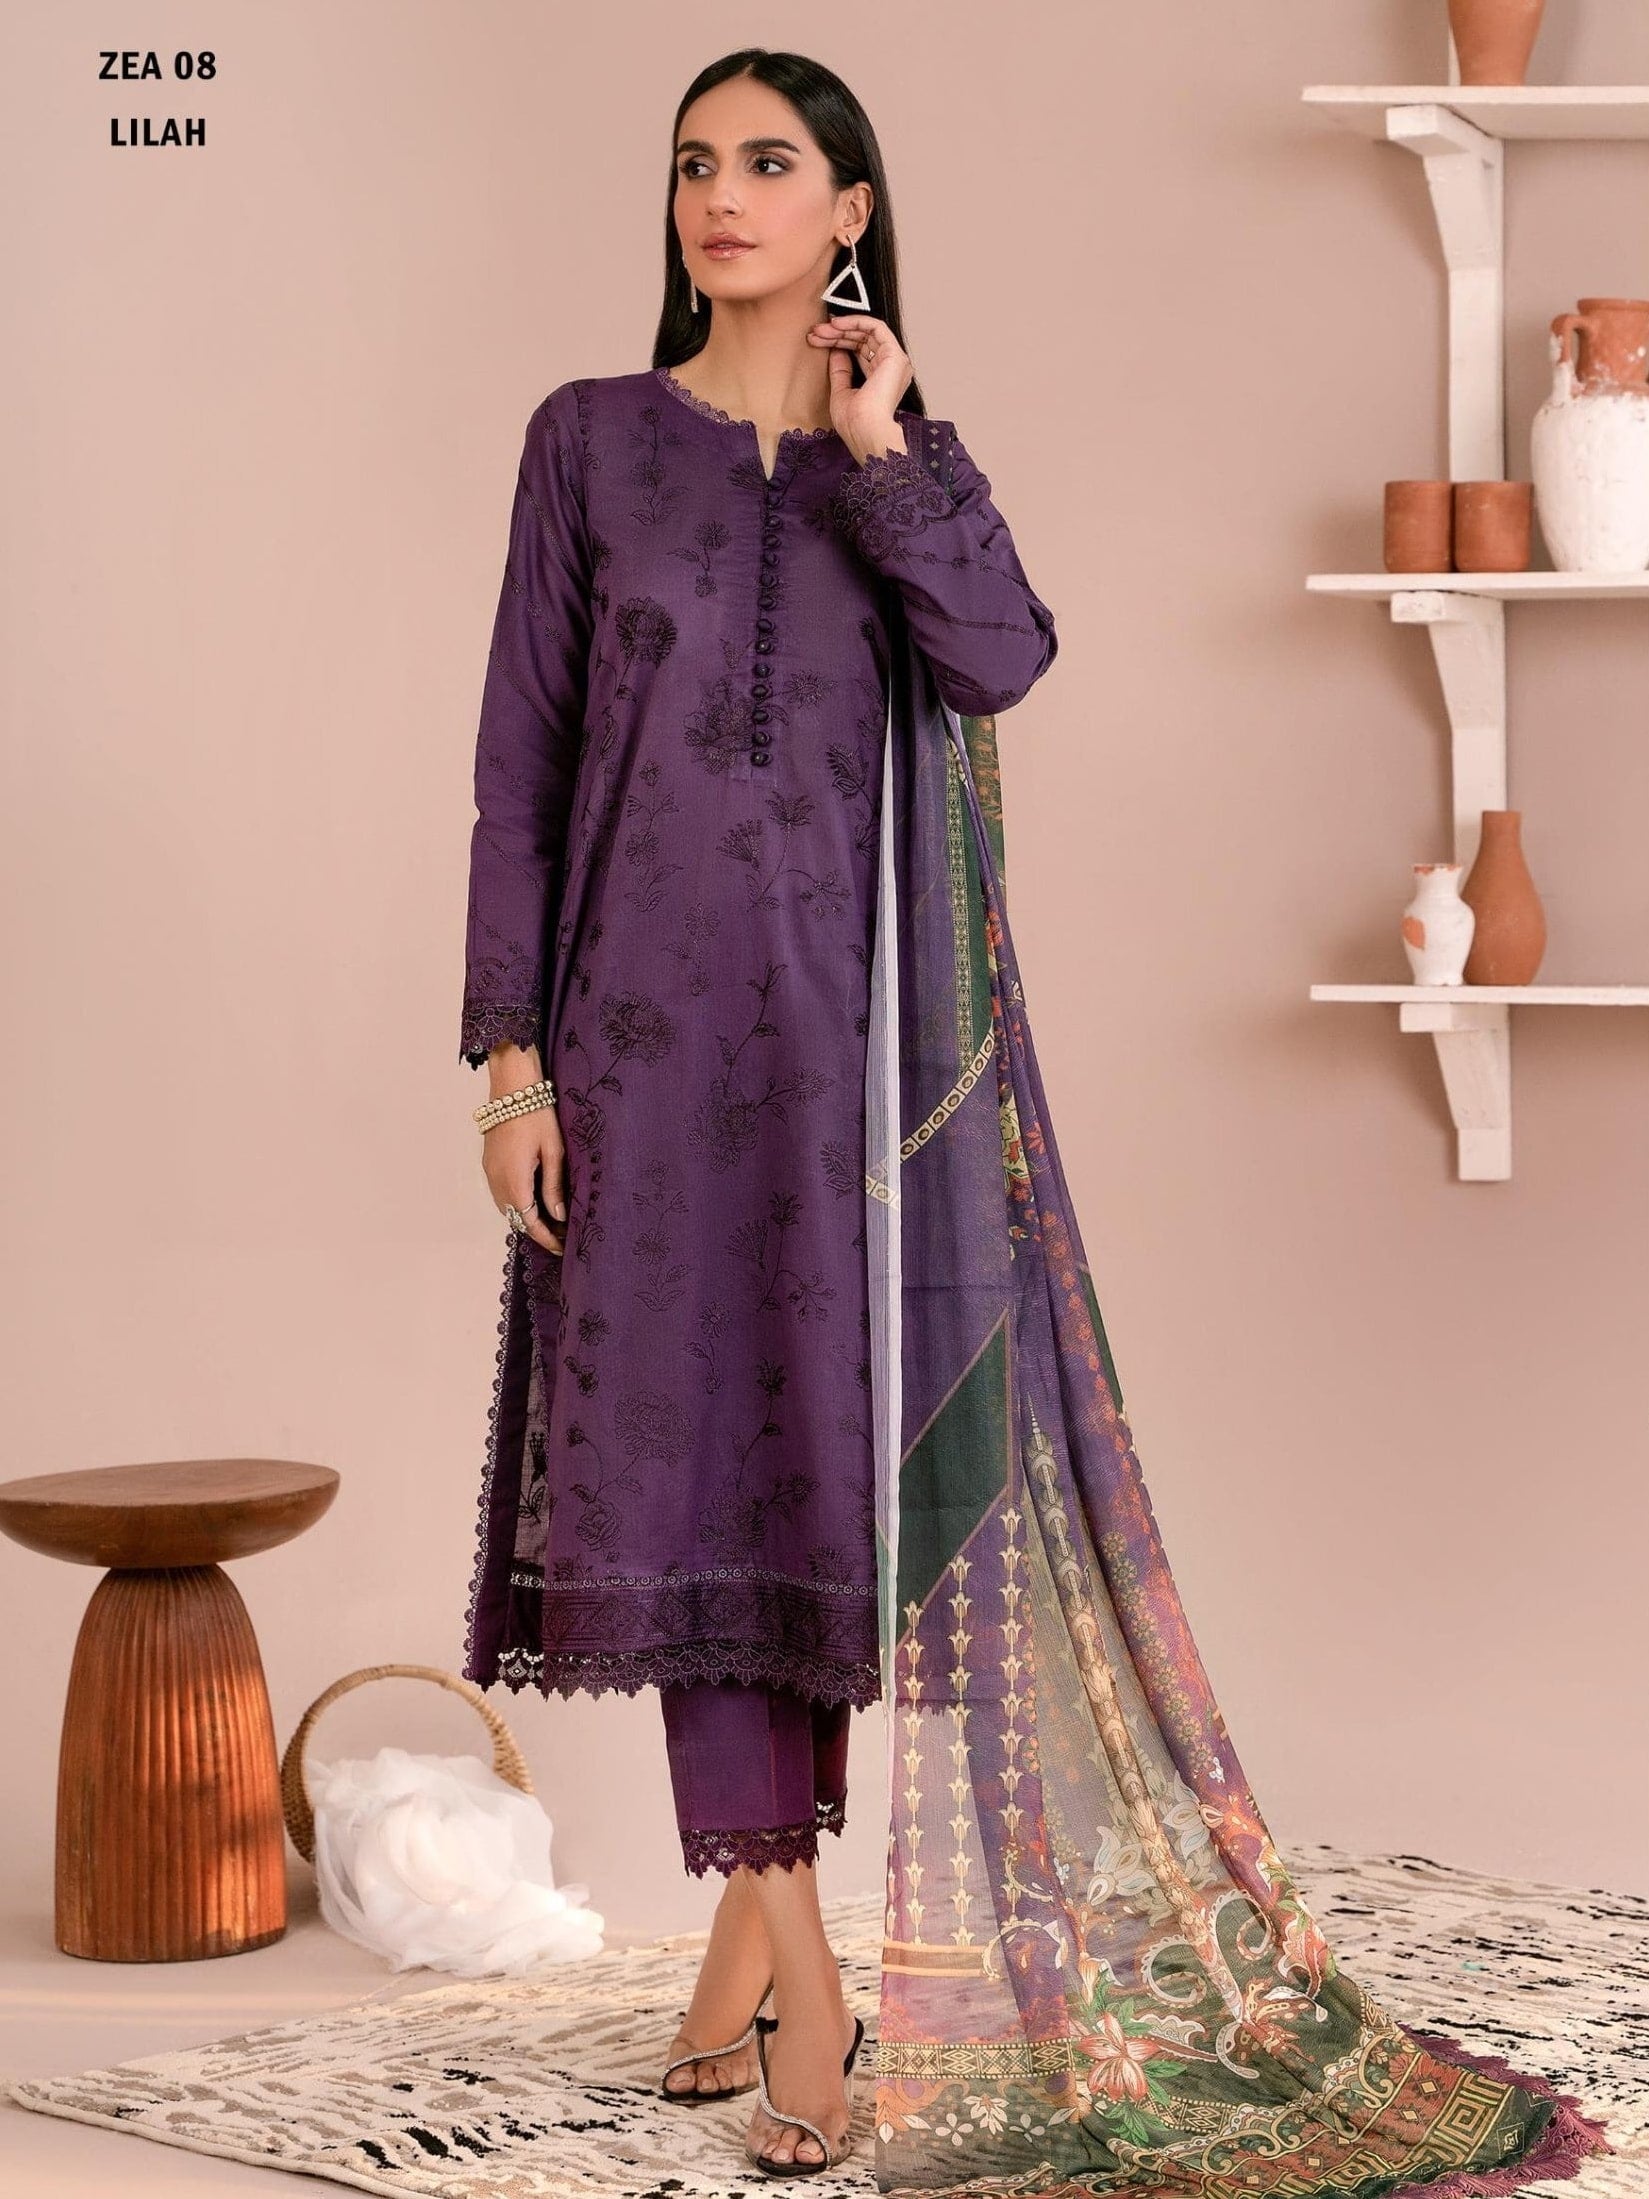 Zarif Eid ul Adha Unstitched Embroidered Lawn 3Pc Suit ZEA-08 LILAH